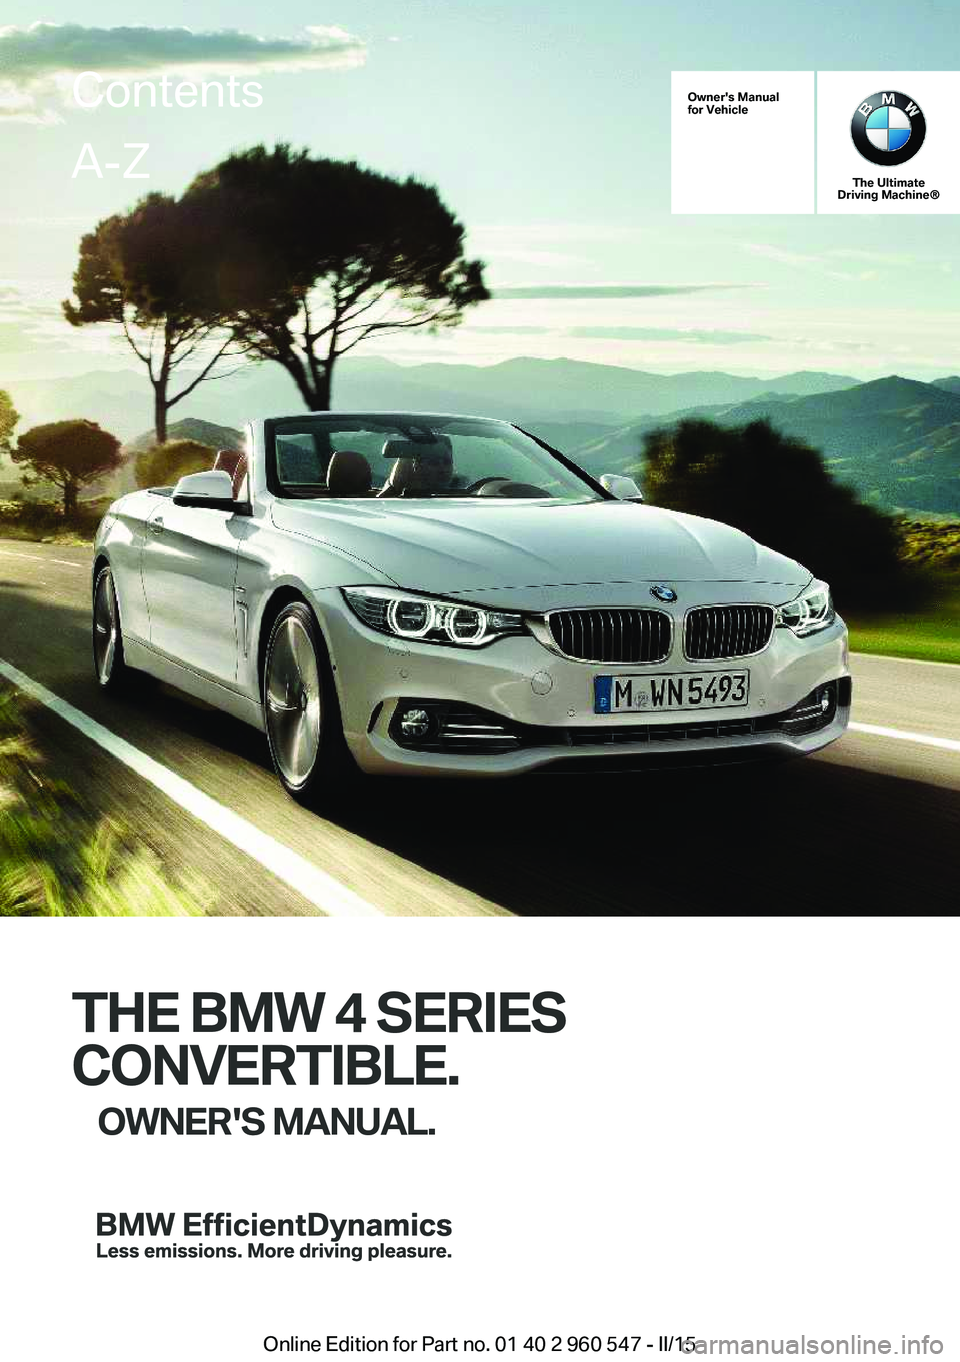 BMW 435I CONVERTIBLE 2015  Owners Manual Owner's Manual
for Vehicle
The Ultimate
Driving Machine®
THE BMW 4 SERIES
CONVERTIBLE. OWNER'S MANUAL.
ContentsA-Z
Online Edition for Part no. 01 40 2 960 547 - II/15   